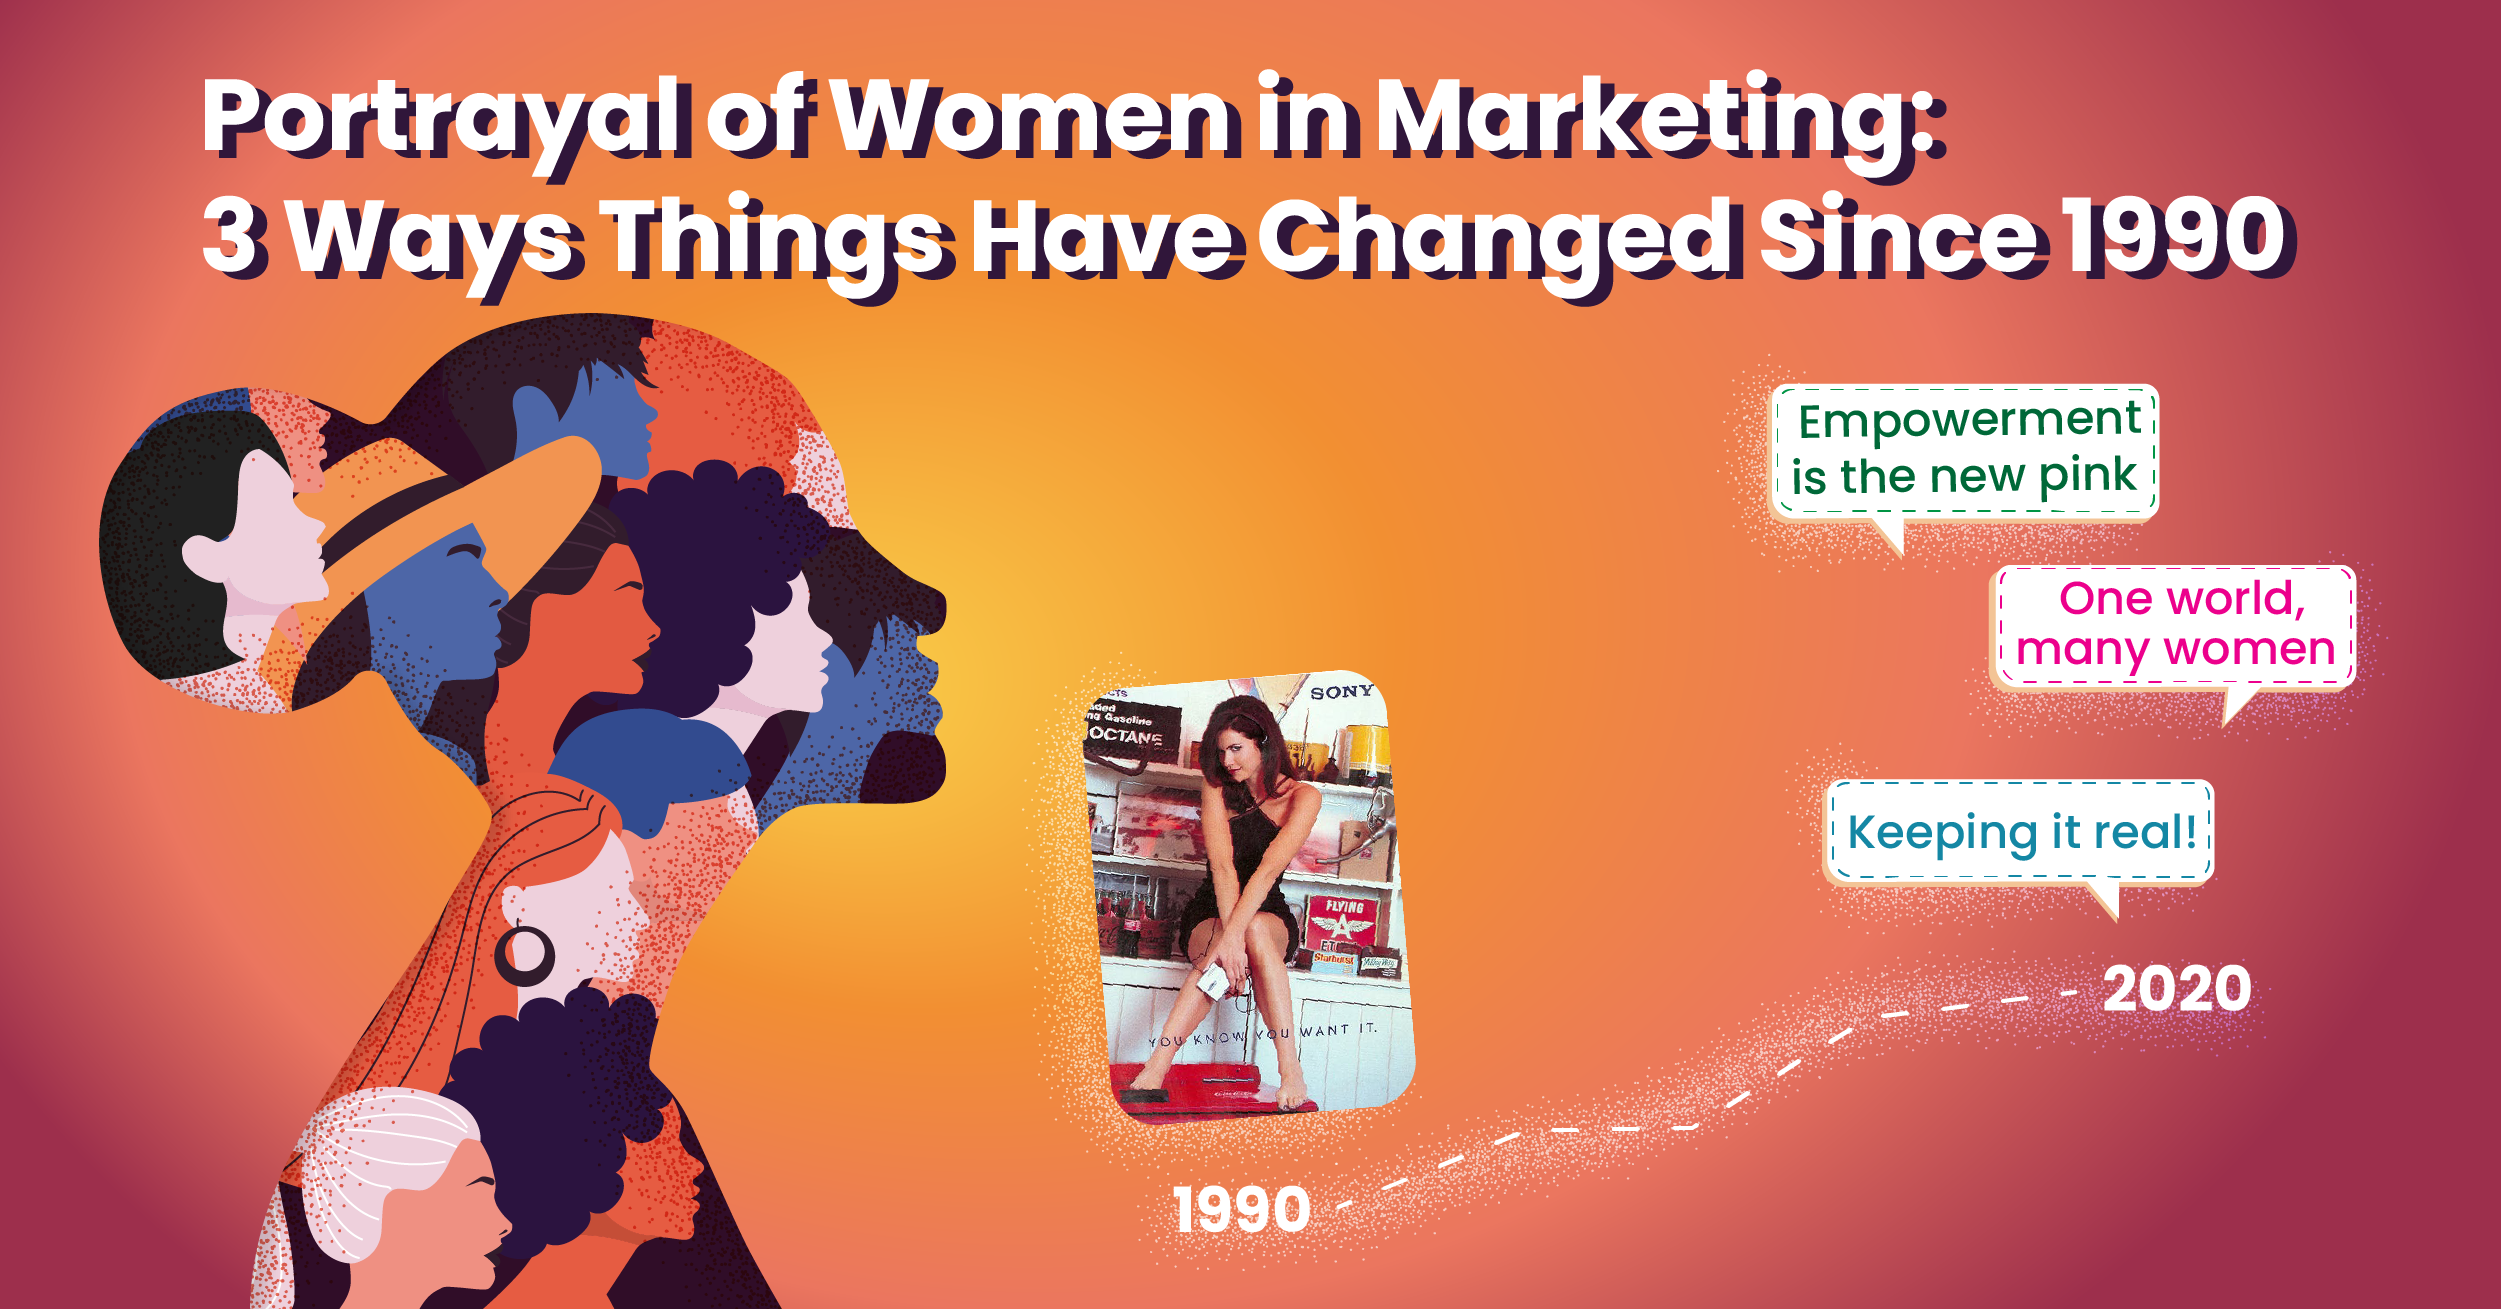 Portrayal of Women in Marketing: 3 Ways Things Have Changed Since 1990